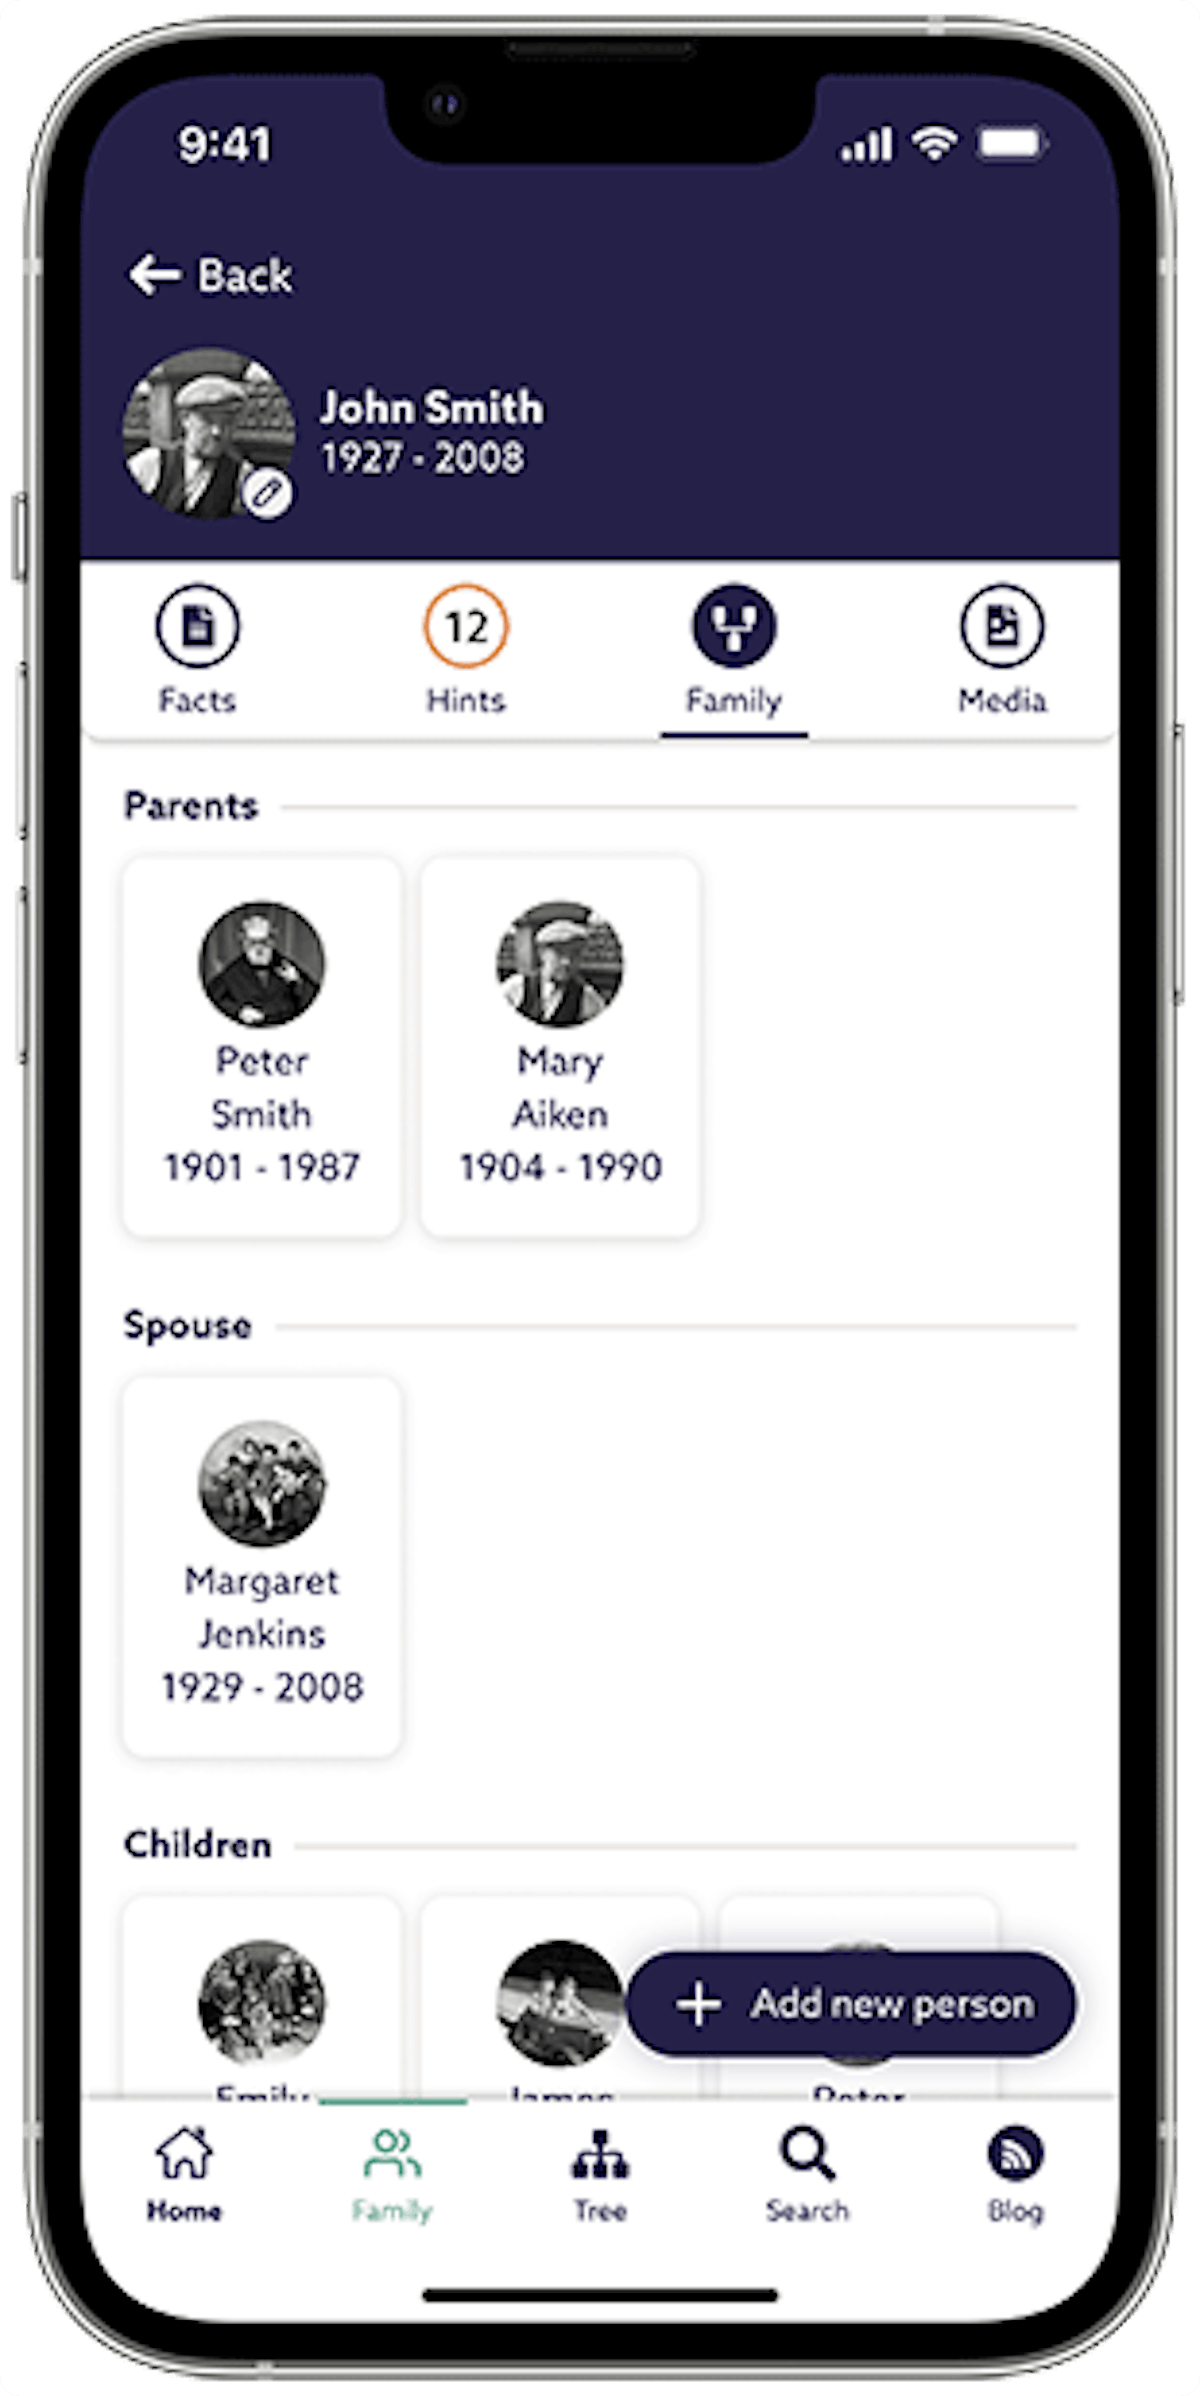 Family tab in profiles of the Findmypast app